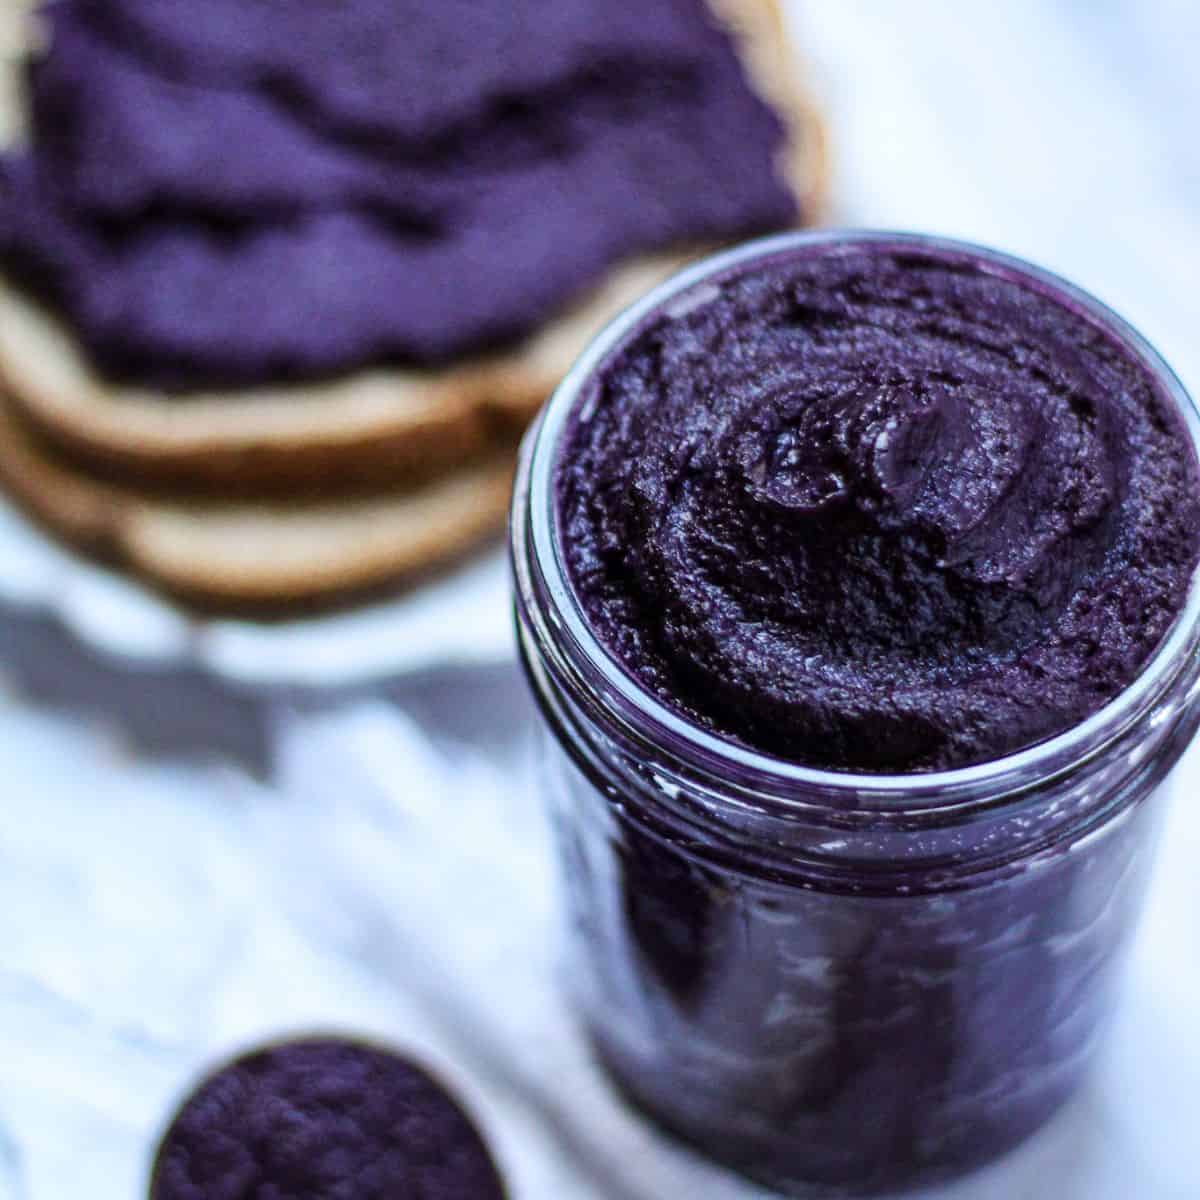 Ube halaya jam in a jar and spread in a toasted bread.